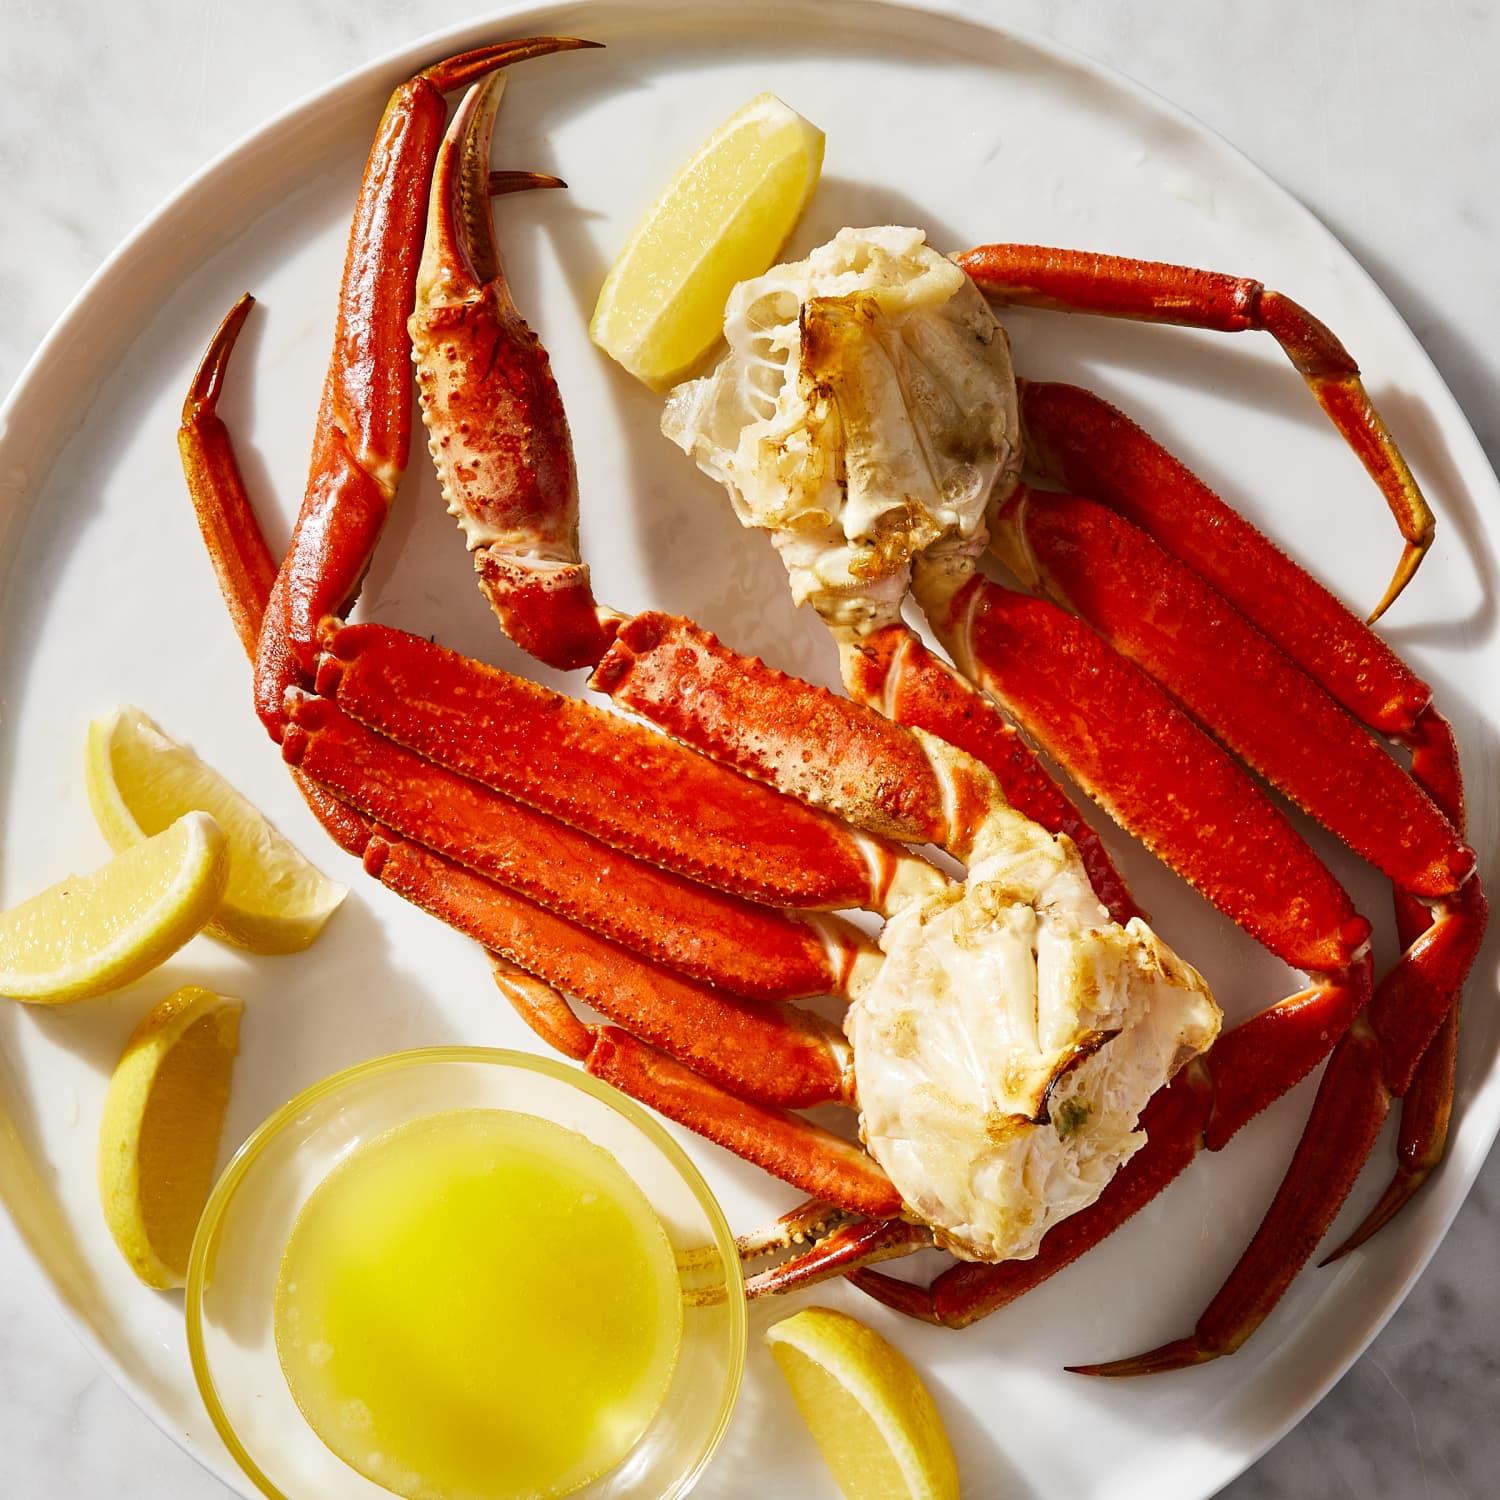 https://cdn.apartmenttherapy.info/image/upload/f_jpg,q_auto:eco,c_fill,g_auto,w_1500,ar_1:1/k%2FPhoto%2FSeries%2F2022-12-How-to-Cook-Crab-Legs%2F2022-how-to-eat-crab_389